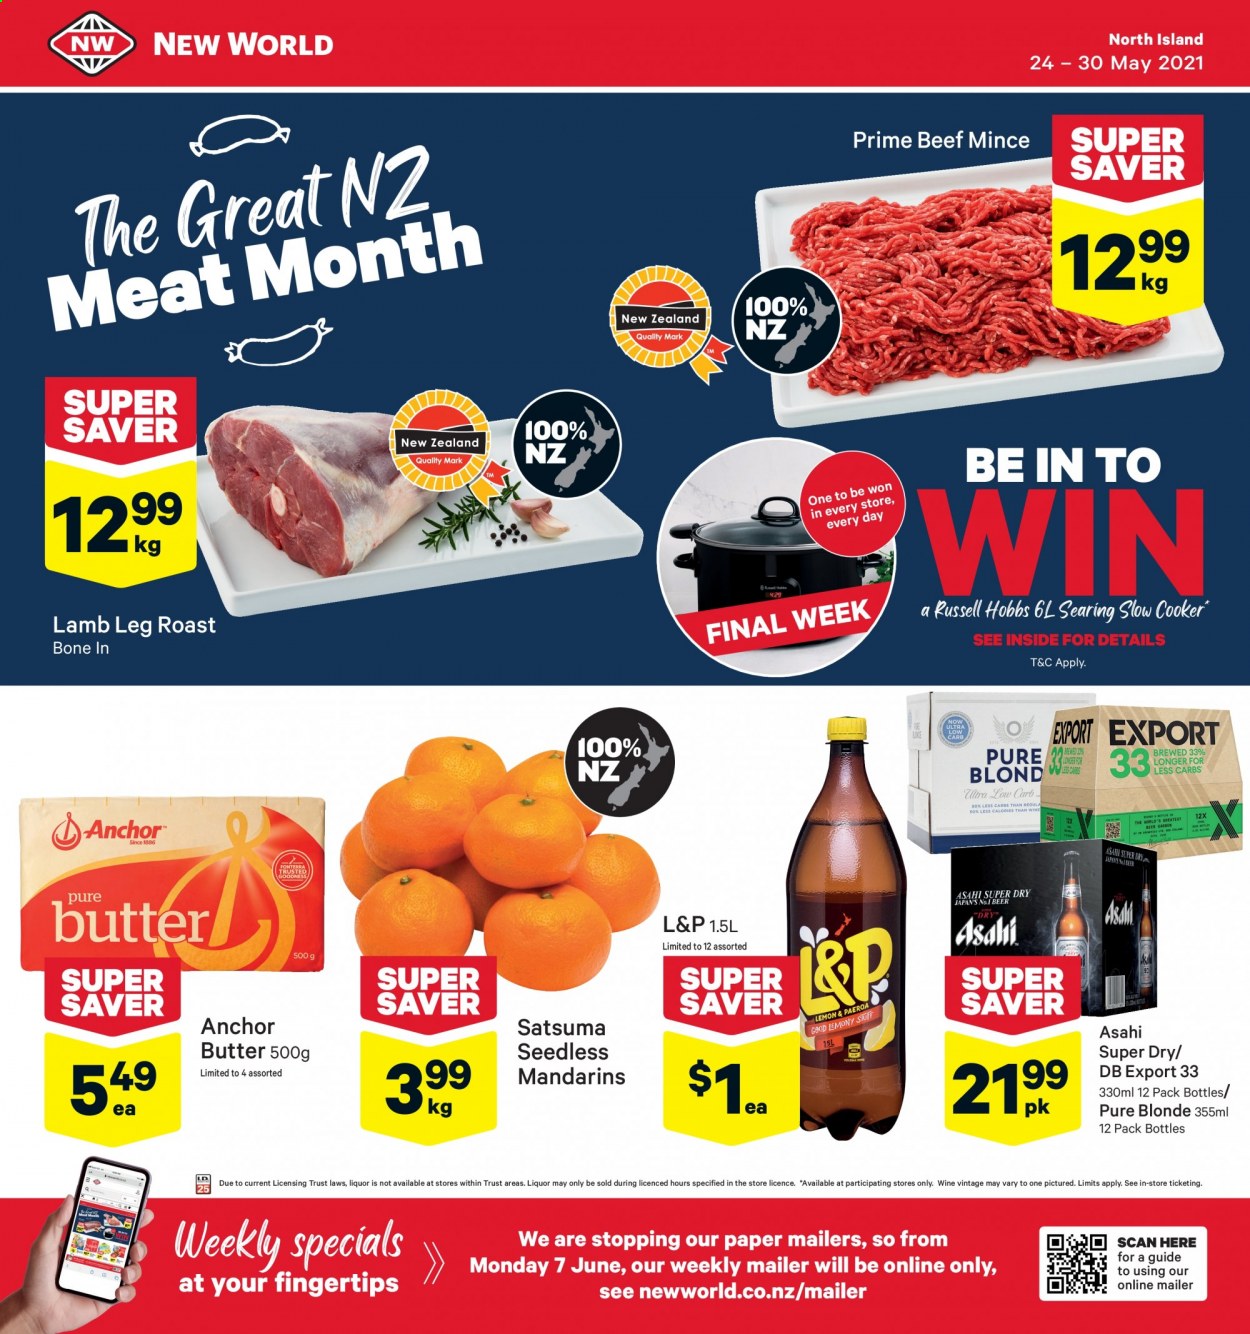 thumbnail - New World mailer - 24.05.2021 - 30.05.2021 - Sales products - mandarines, butter, Anchor, L&P, wine, beef meat, ground beef, lamb meat, lamb leg. Page 1.